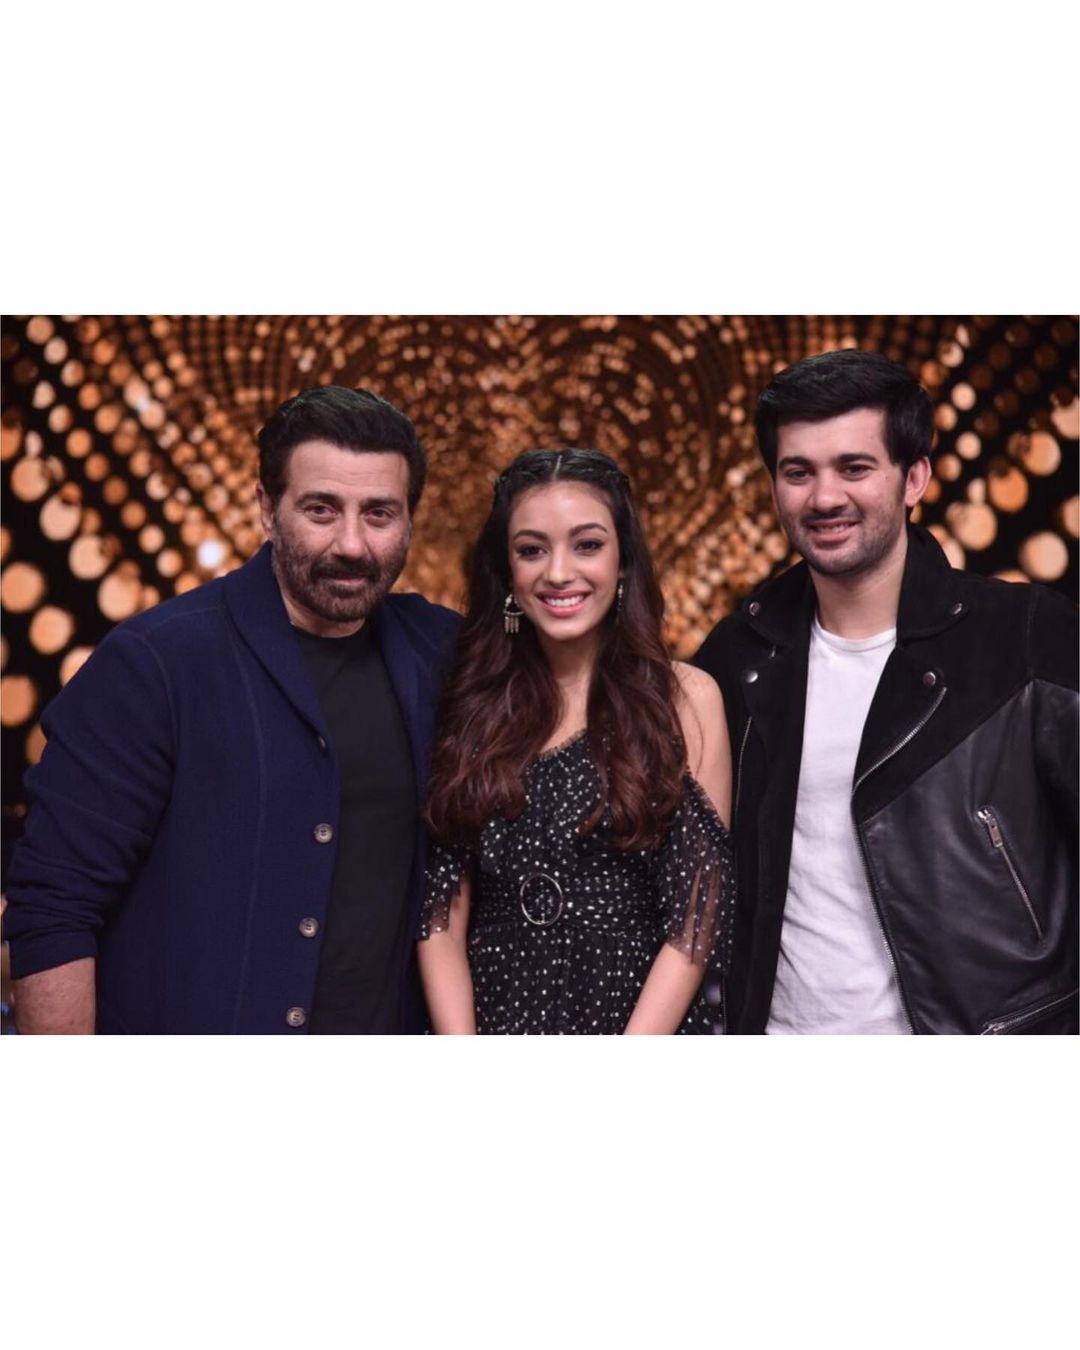 Karan Deol reveals how he gathered his confidence after debut film Pal Pal Dil Ke Paas: ‘Through lockdown, I recharged myself’